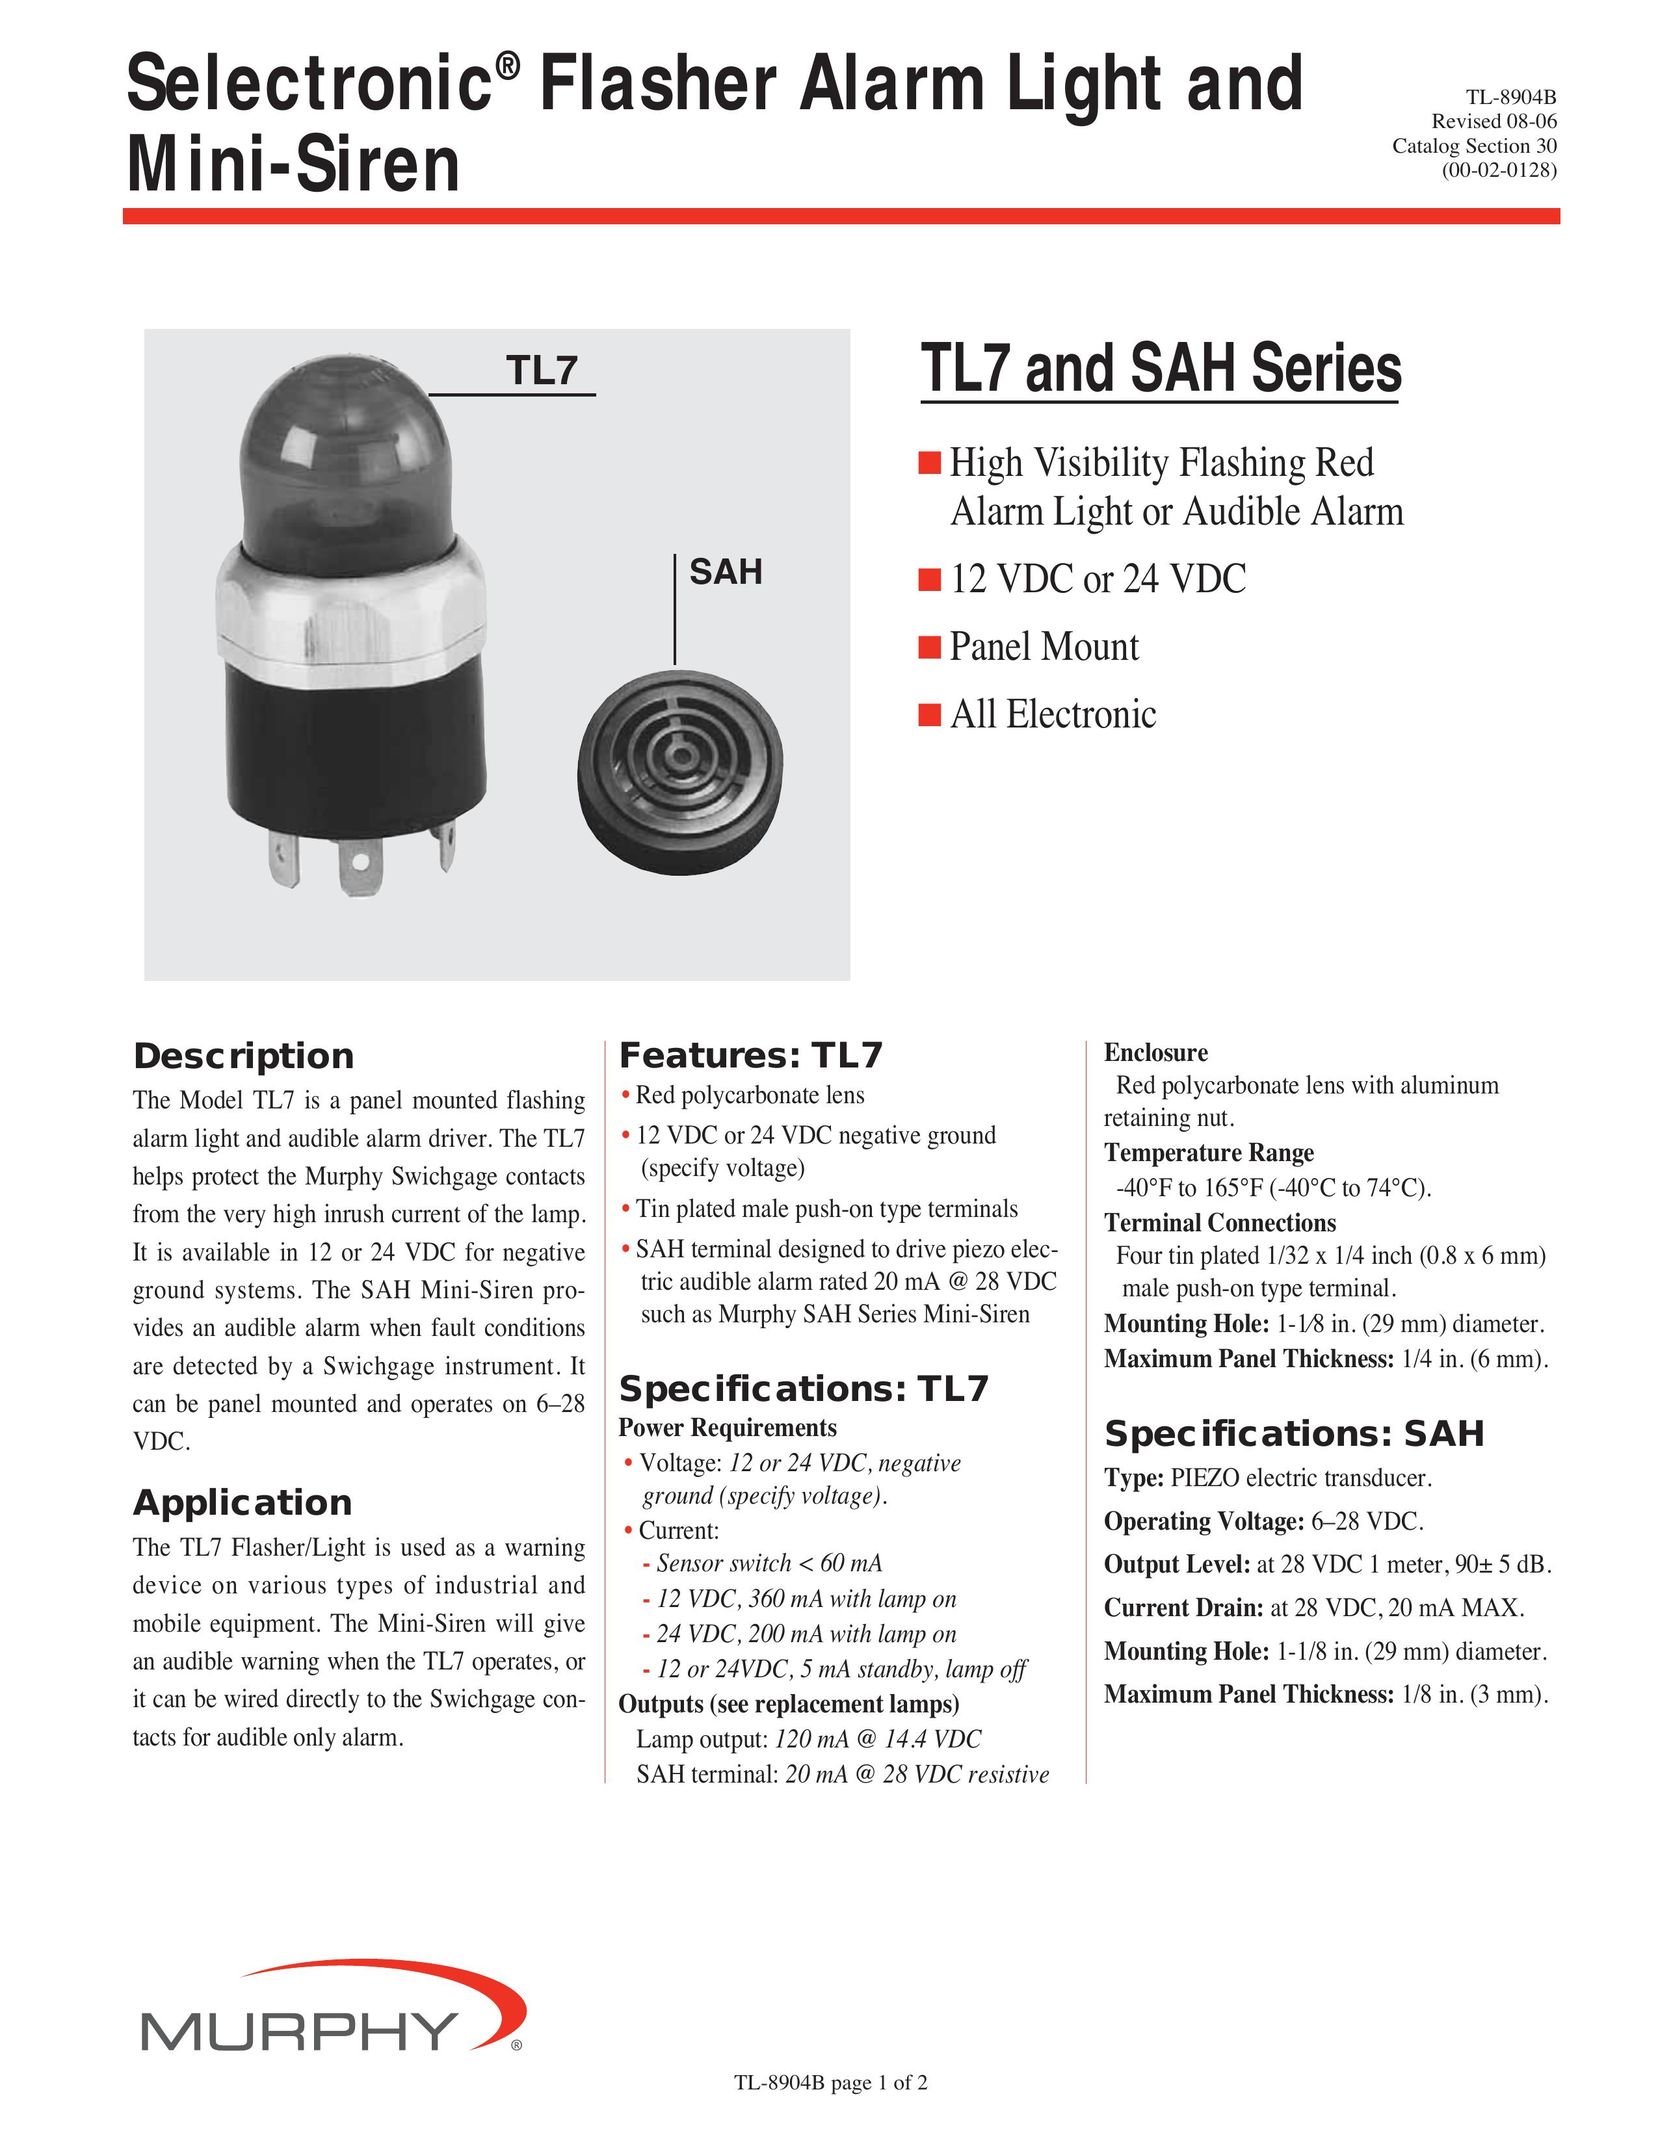 Murphy TL7 Home Security System User Manual